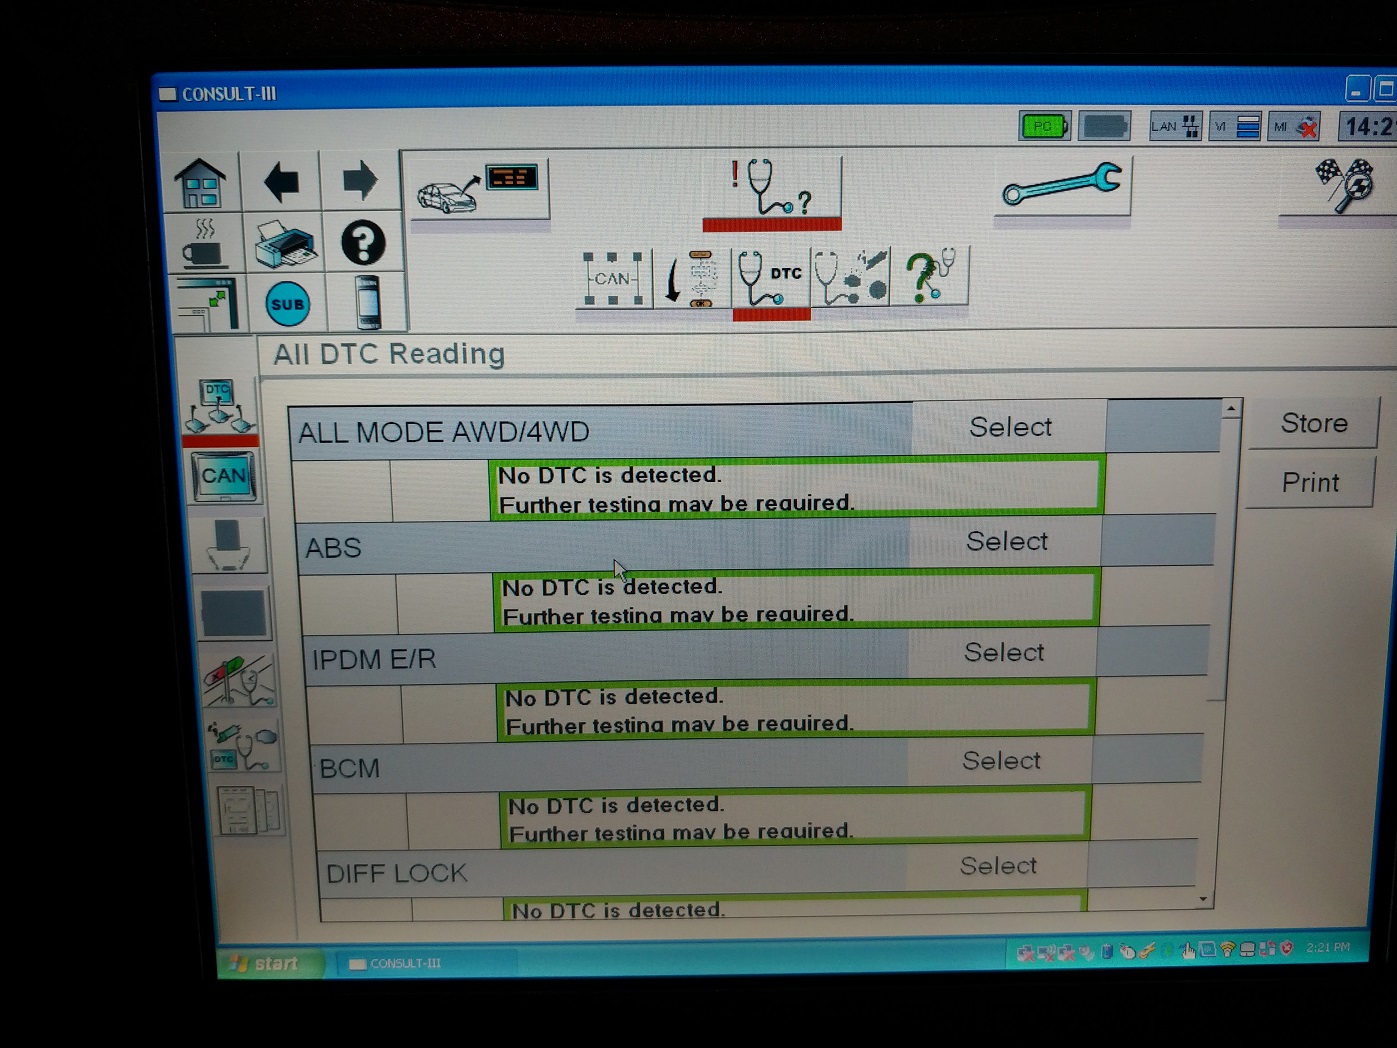 nissan consult iii plus software download